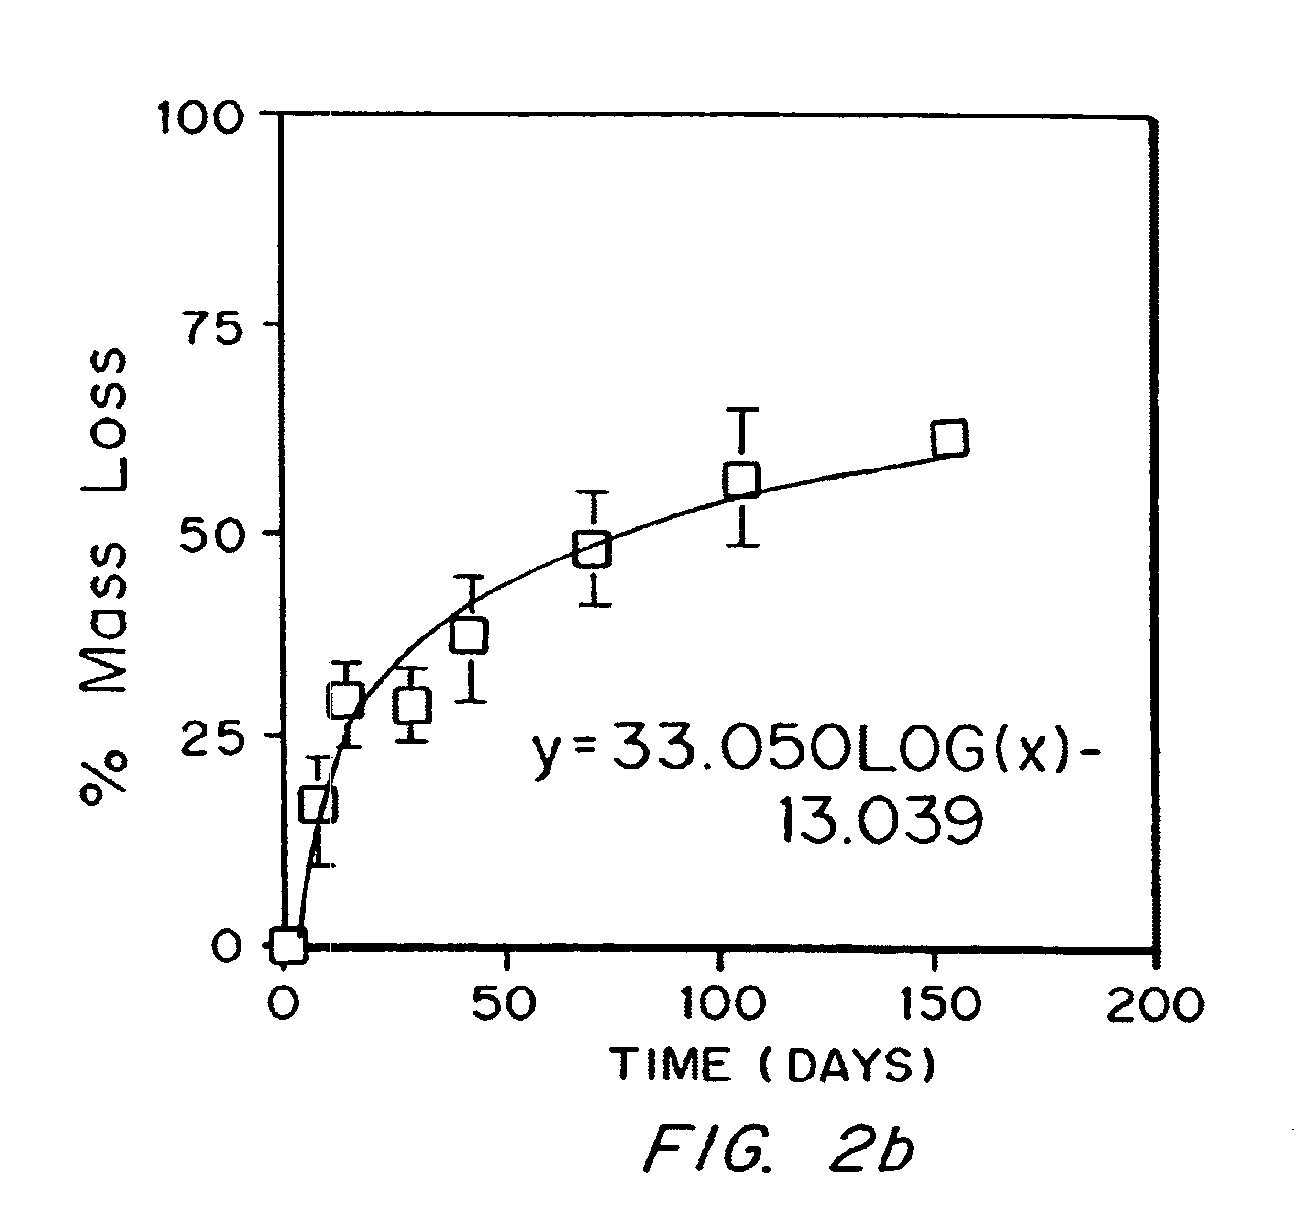 Polymerizable biodegradable polymers including carbonate or dioxanone linkages